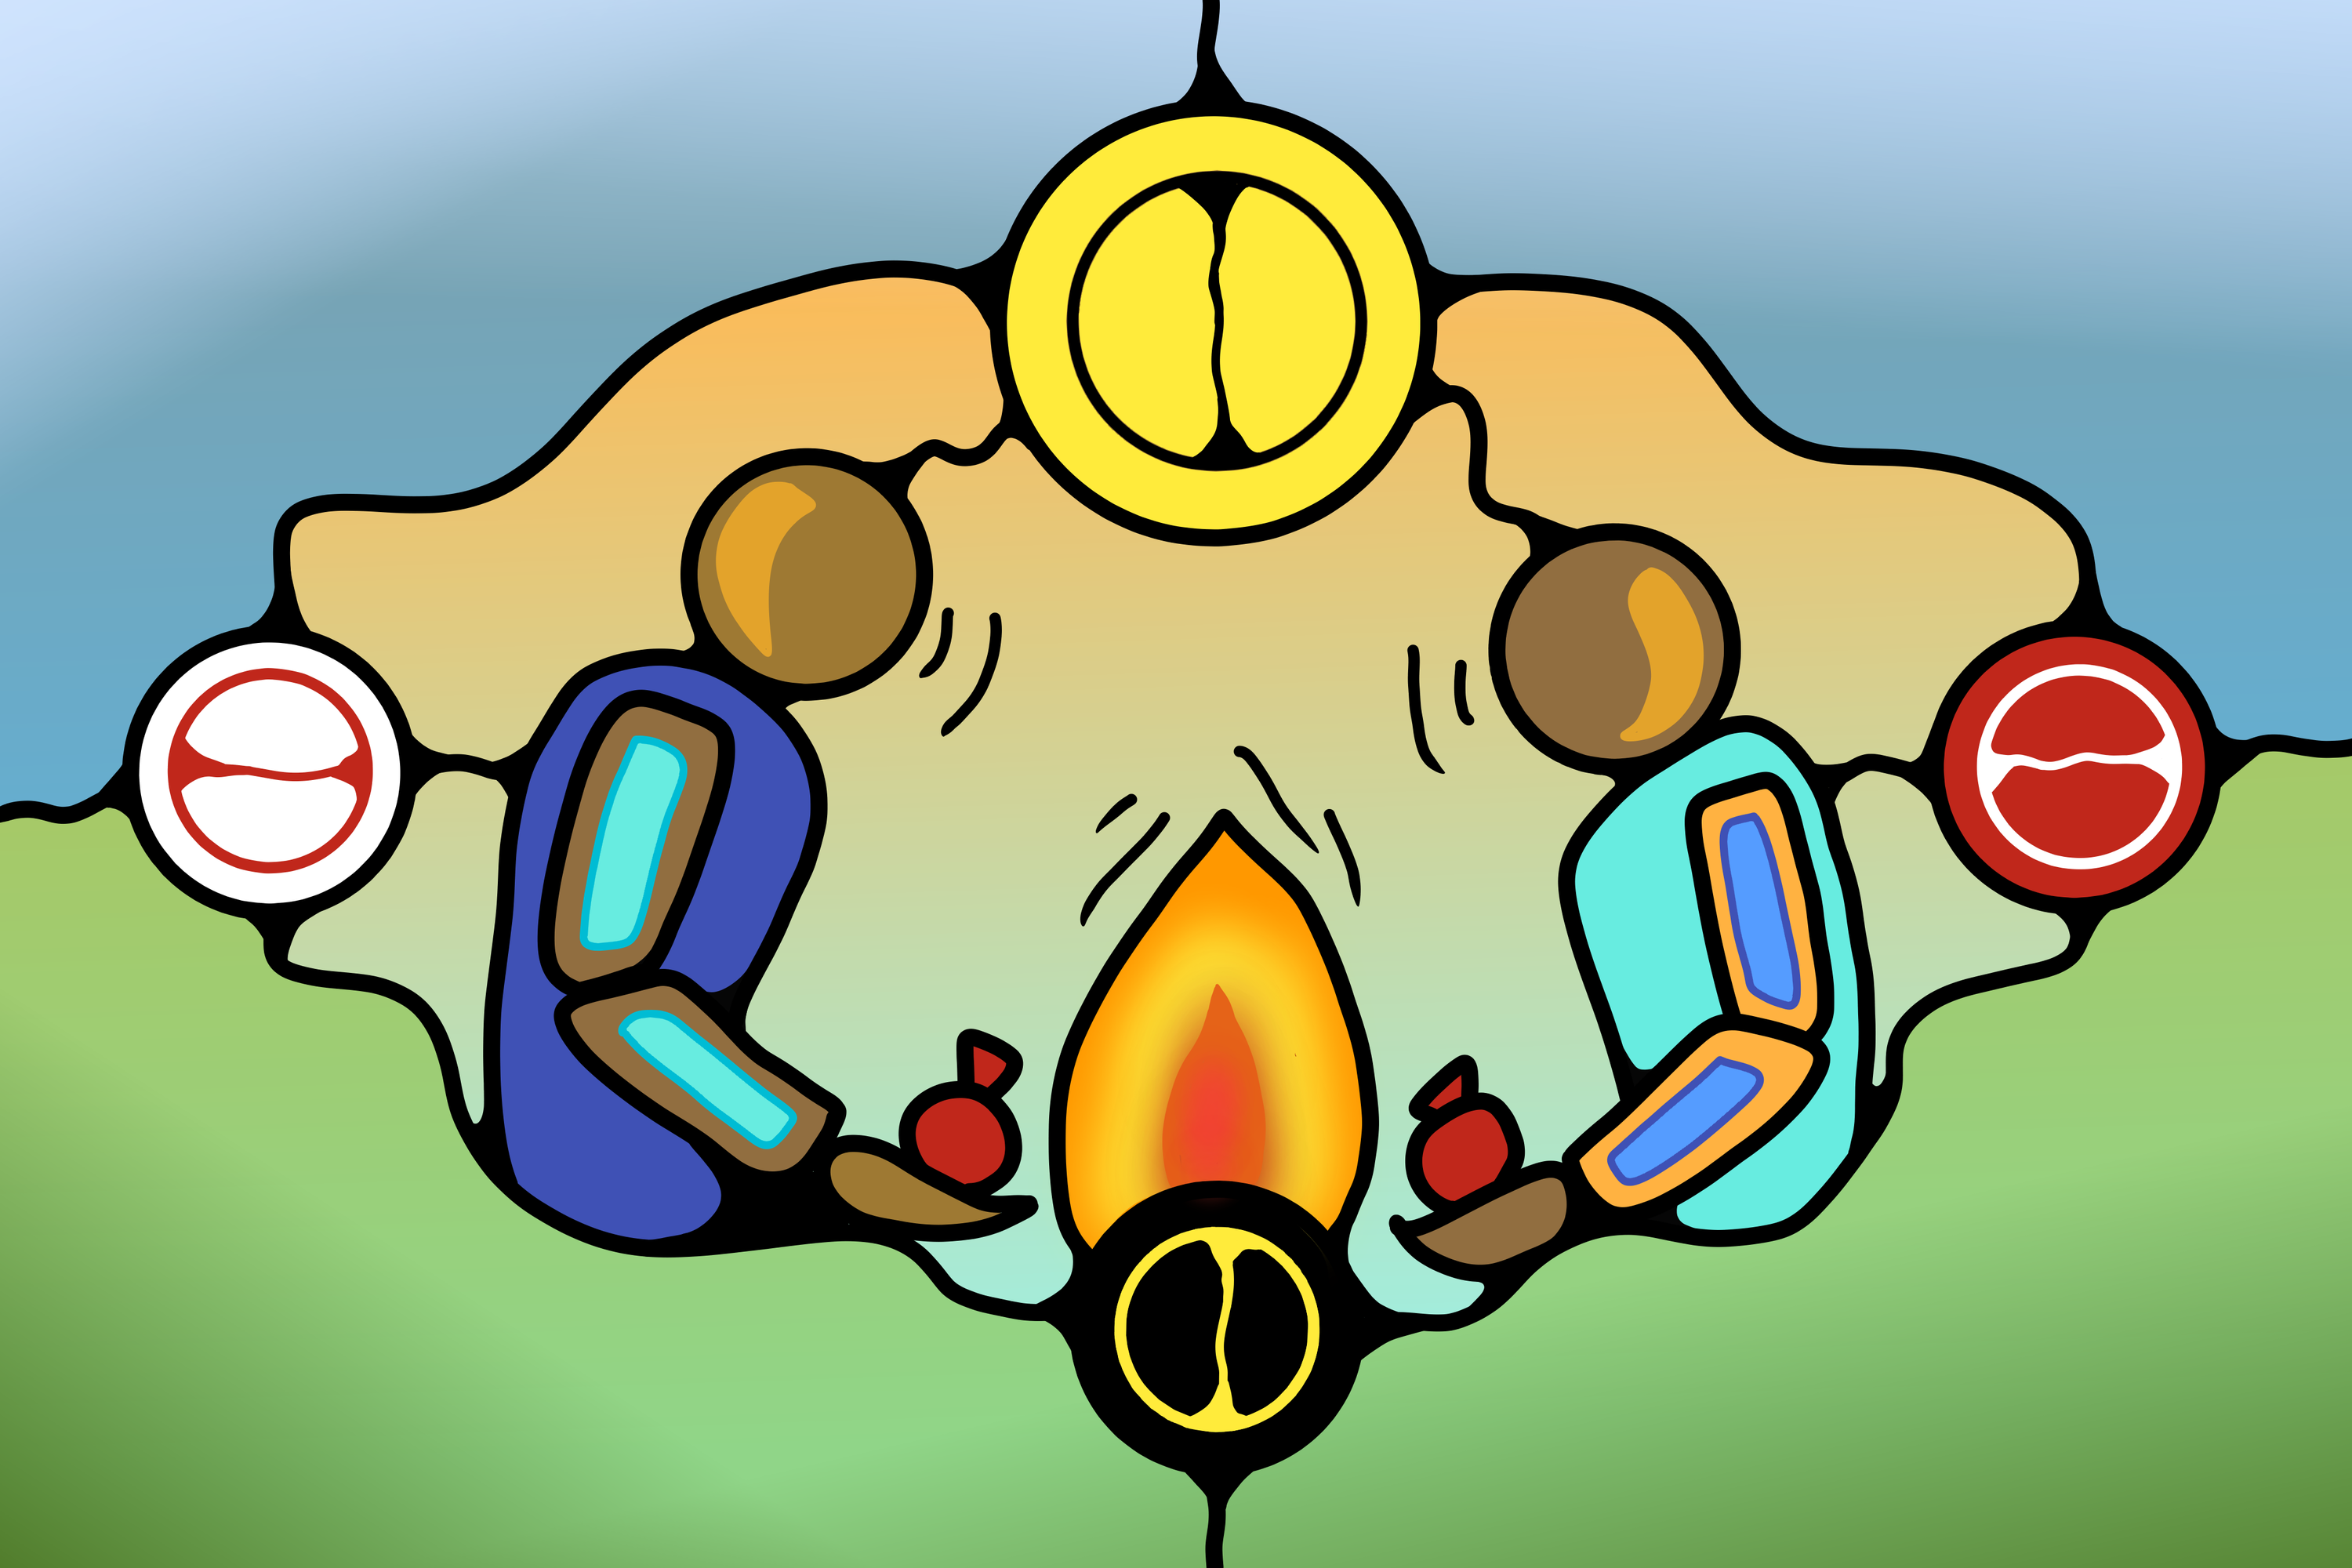 Indigenous style are of two people facing each other over a campfire.